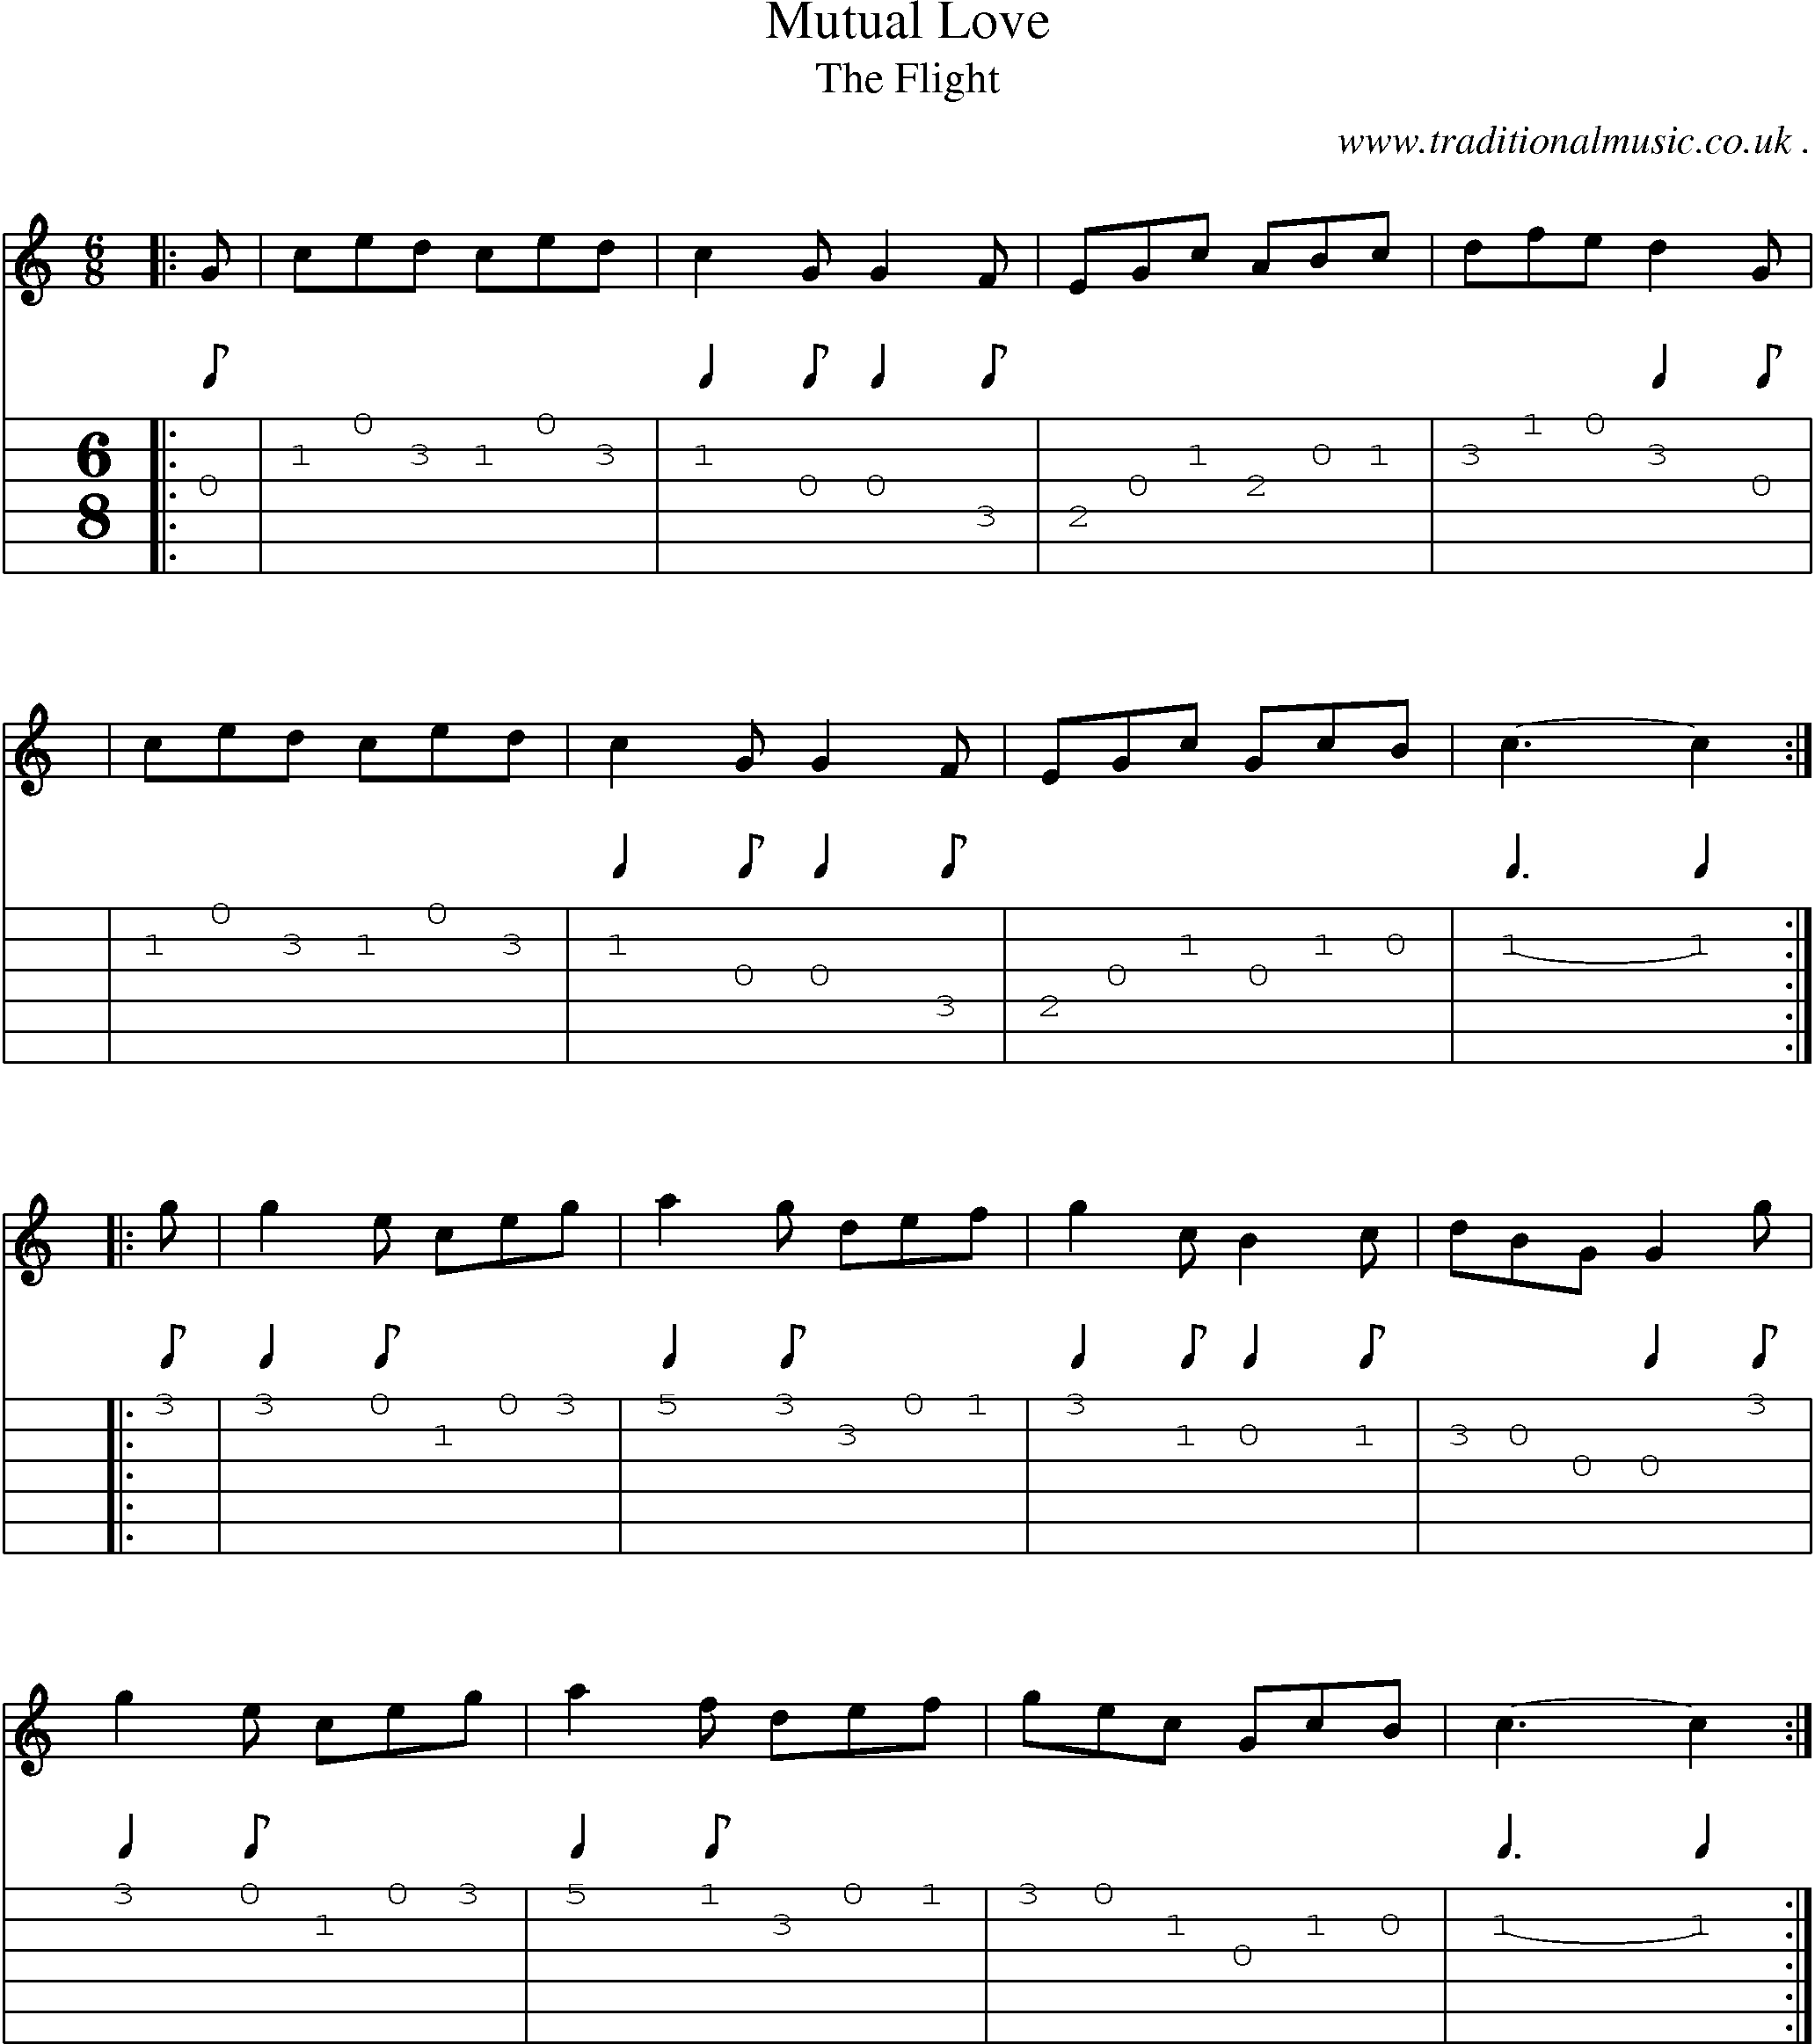 Sheet-Music and Guitar Tabs for Mutual Love